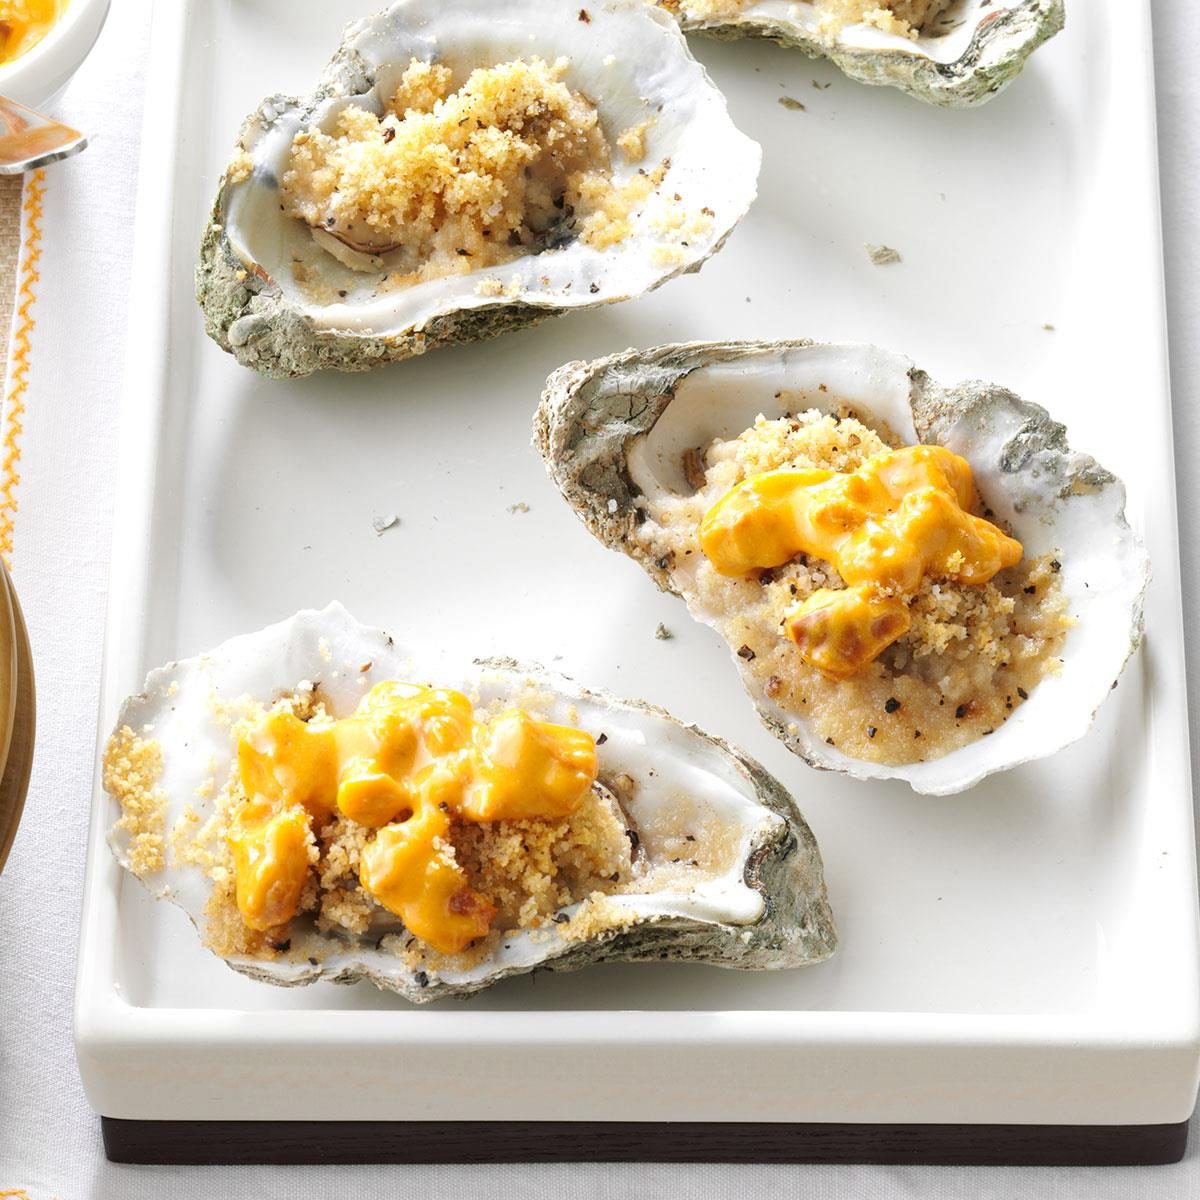 Champagne: Baked Oysters with Tasso Cream